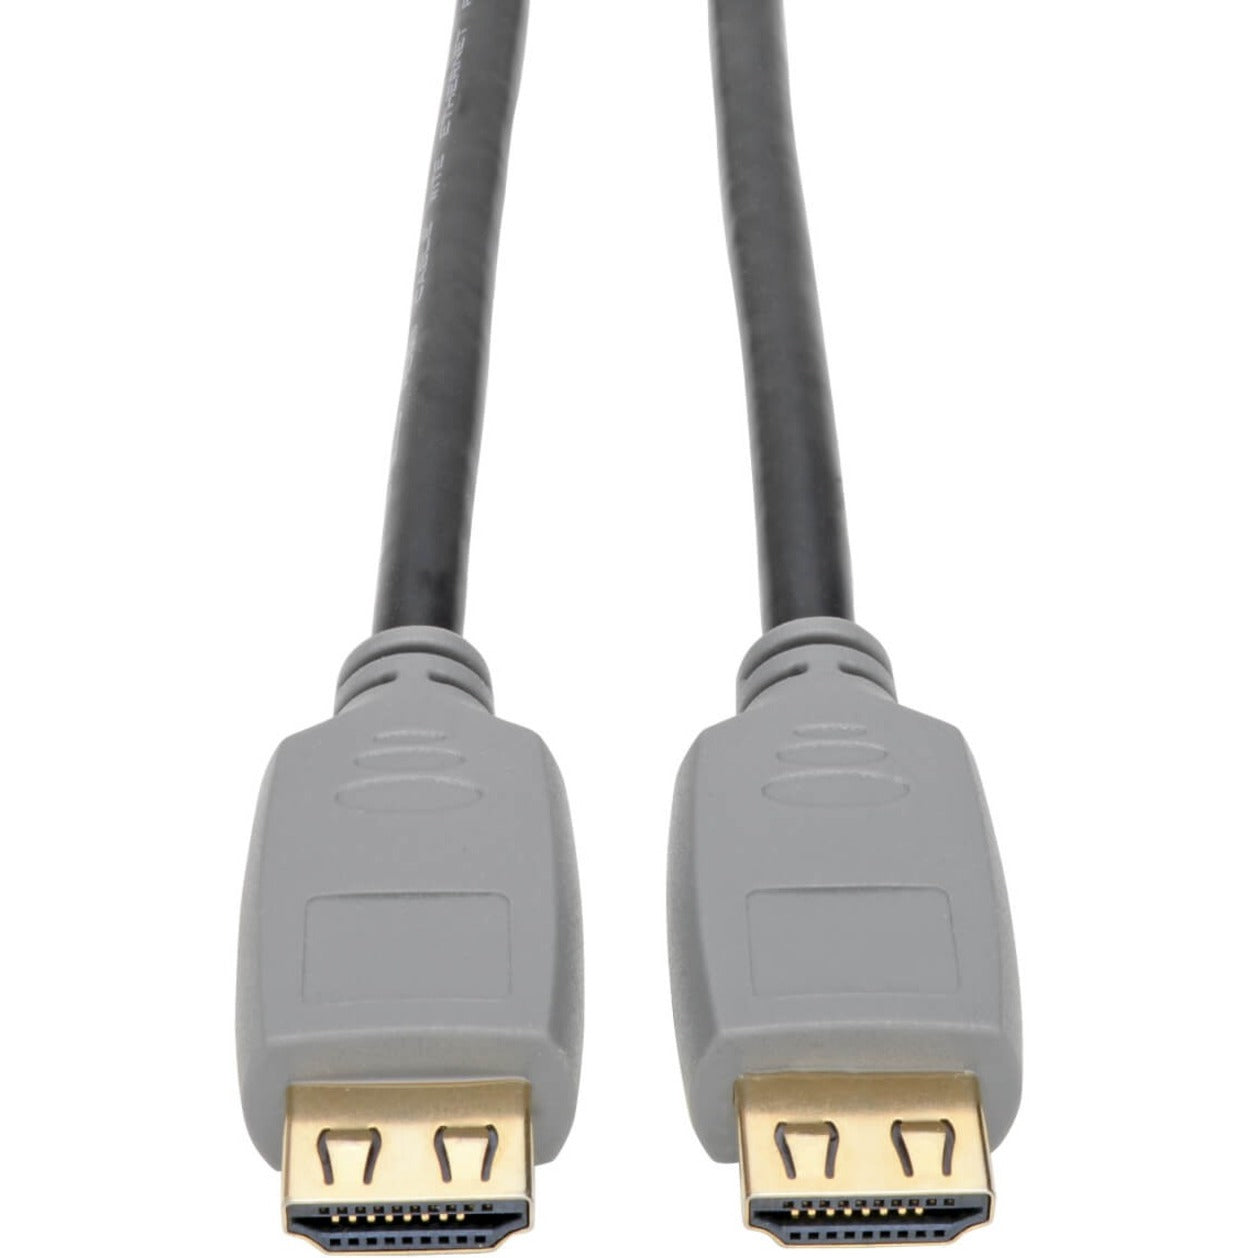 Tripp Lite P568-006-2A High-Speed HDMI 2.0a Cable with Gripping Connectors, M/M, 6 ft., 4K at 60Hz, Black